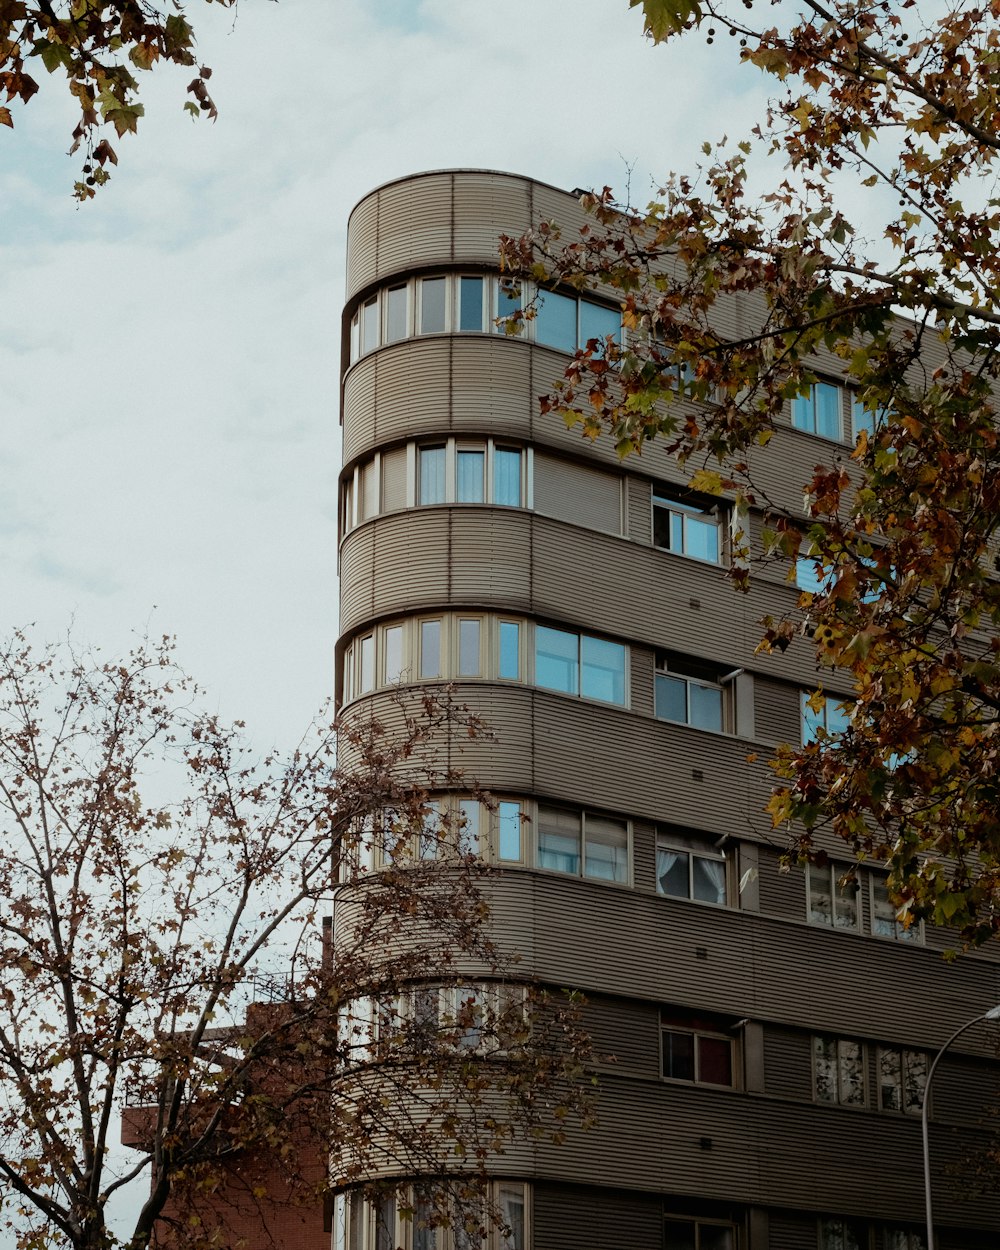 a tall building with many windows next to a tree